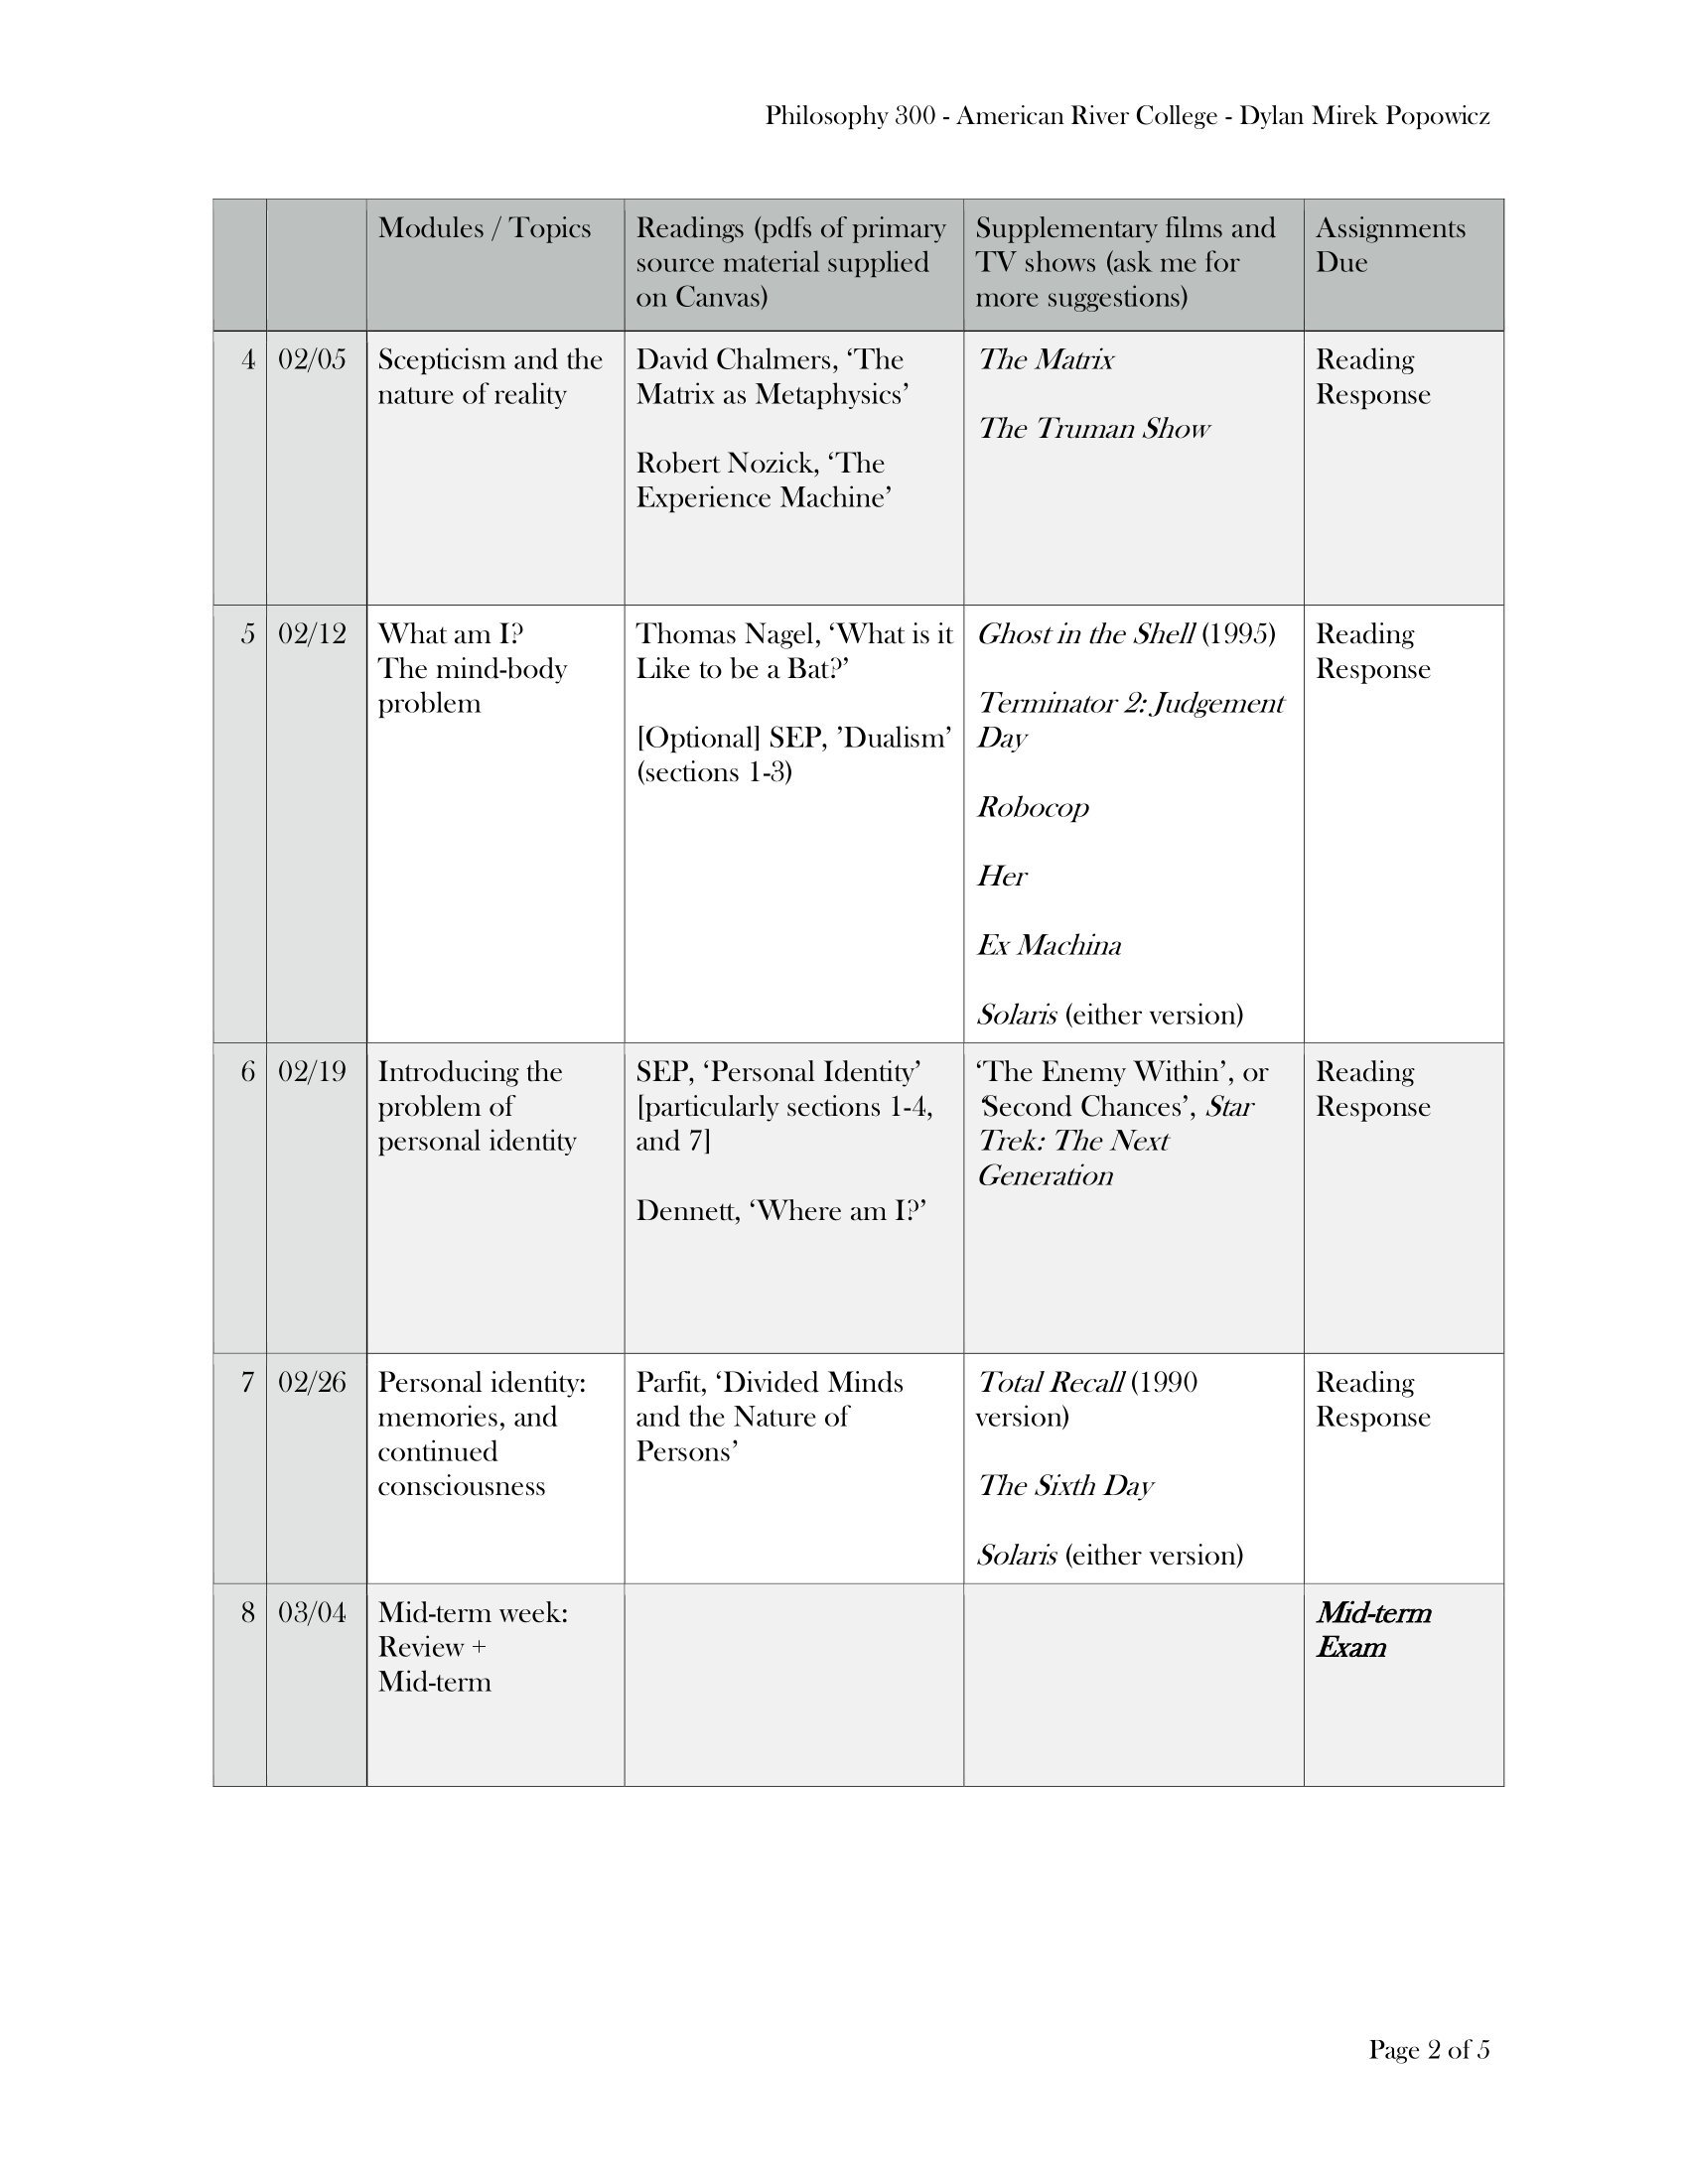 Course Schedule [in person]-2.jpg